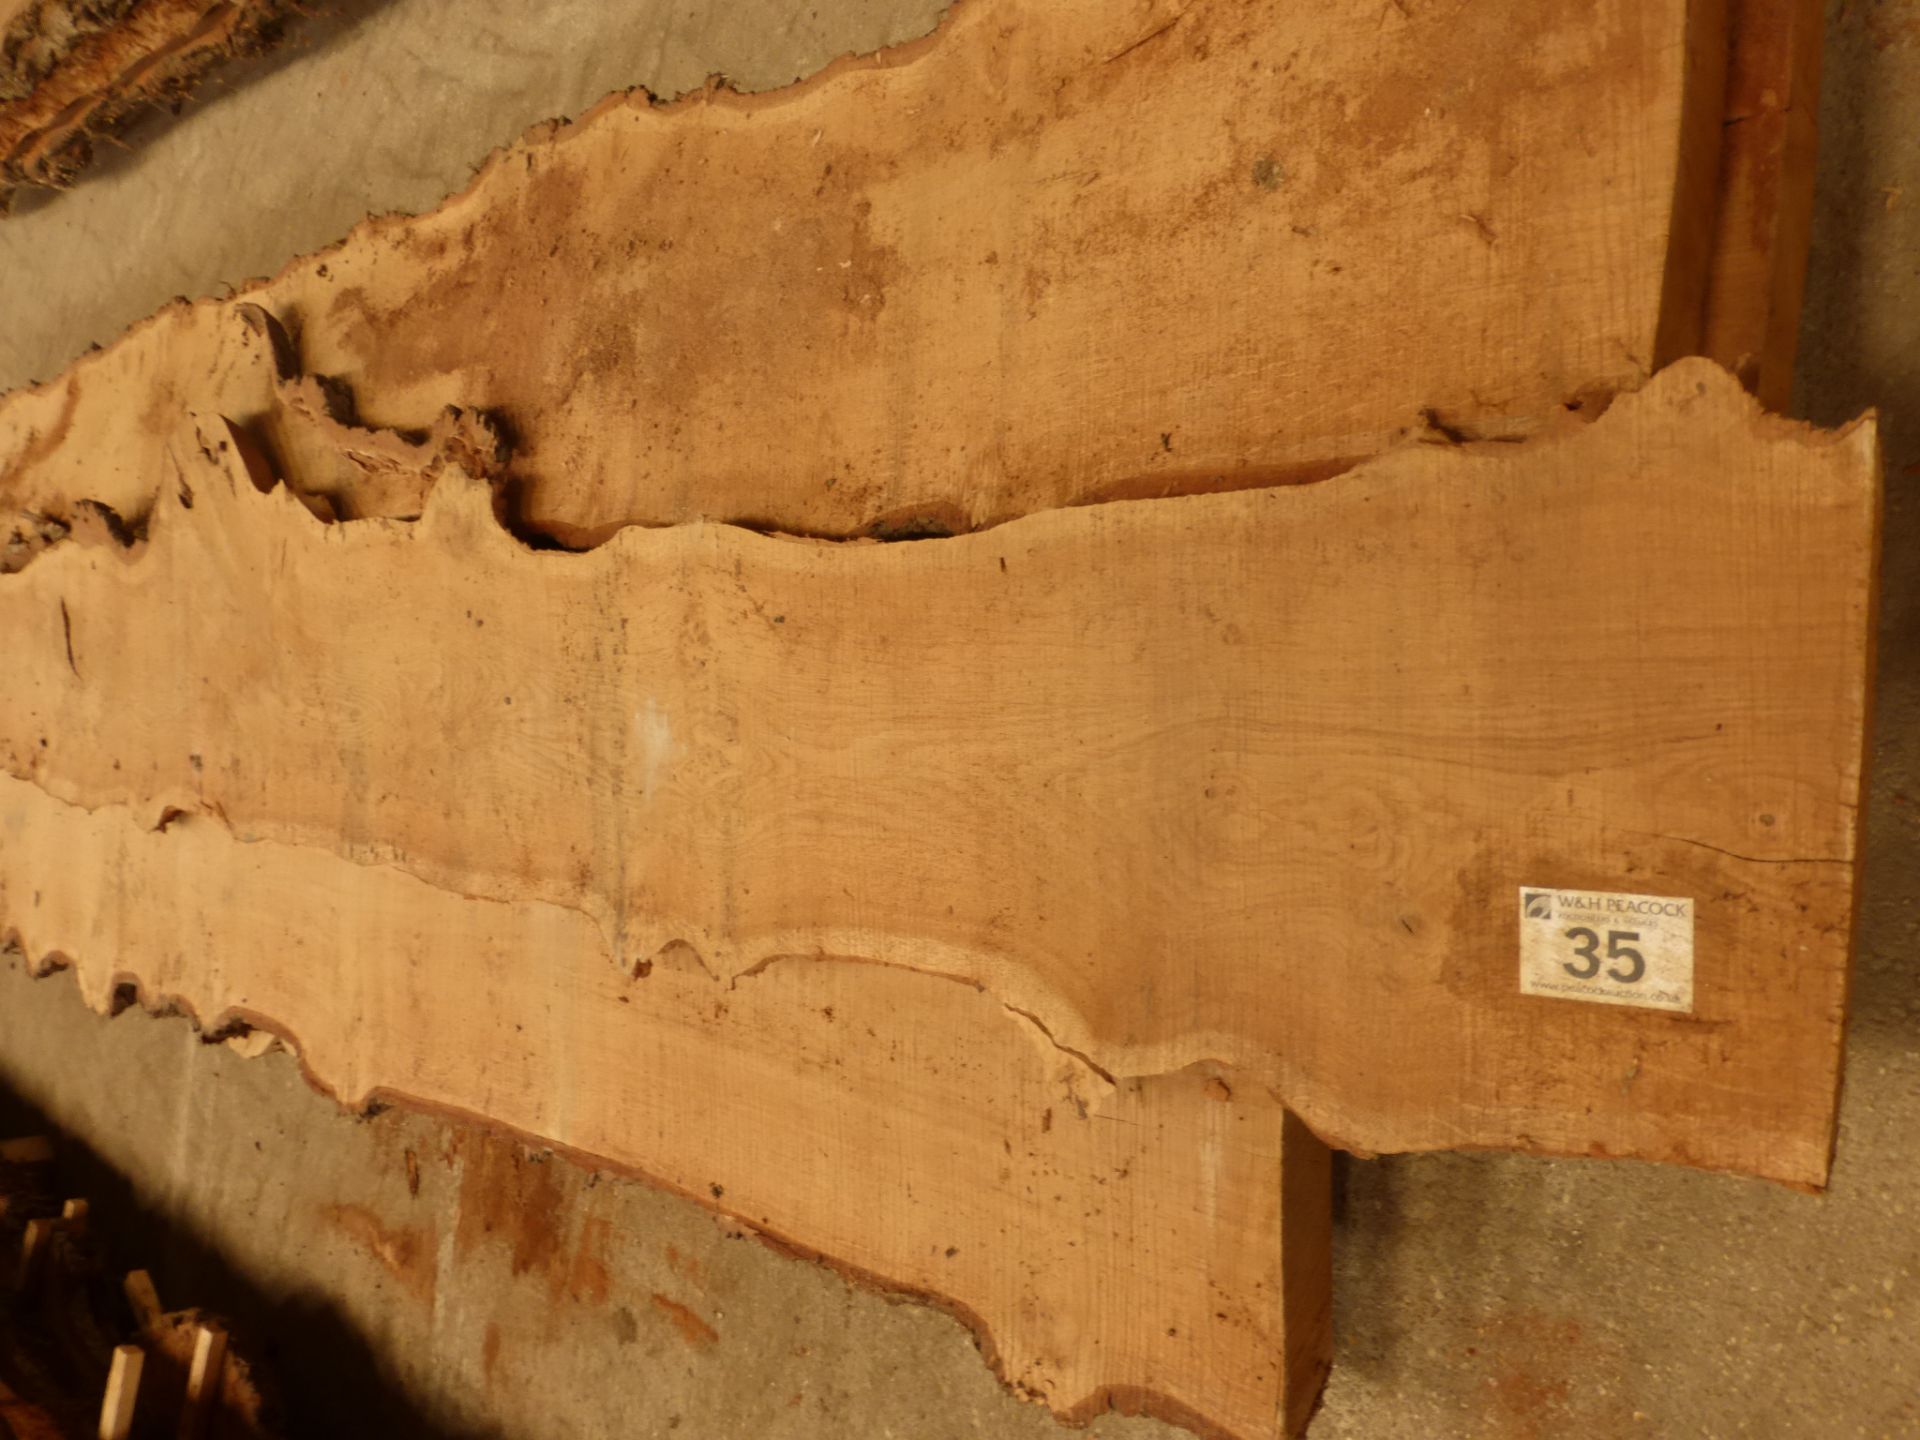 5 burr oak waney edge boards 2500 x 250 x varying thicknesses - Image 5 of 5